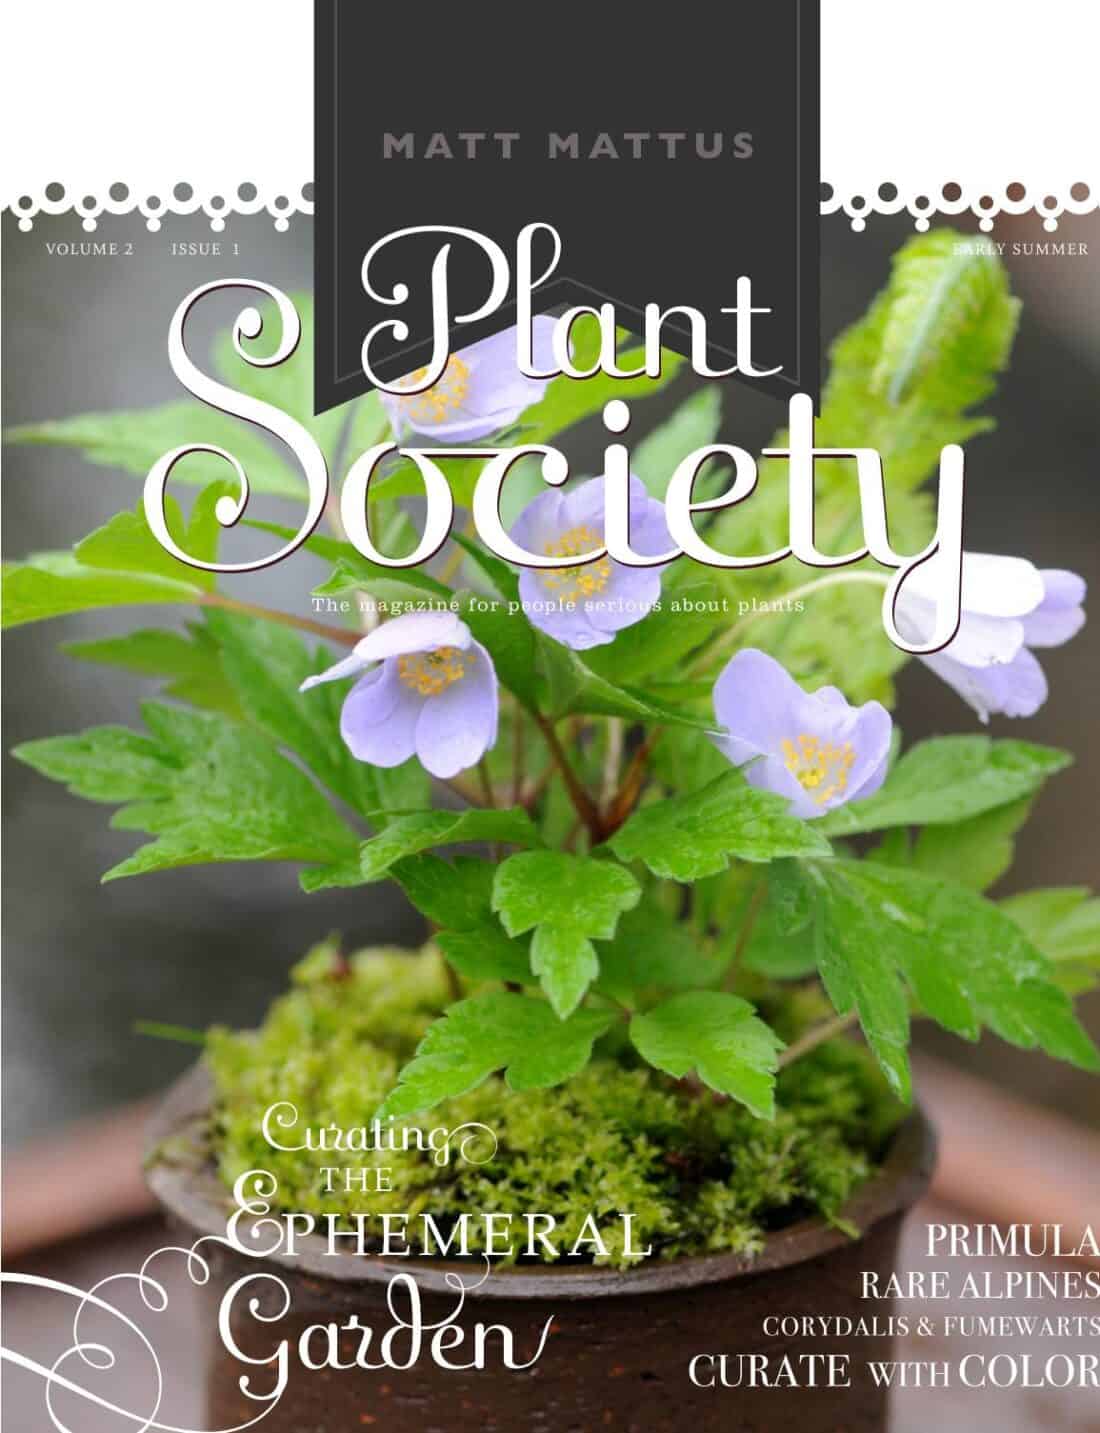 Cover of "plant society" magazine featuring an article on ephemeral gardens and showcasing primula and other alpine plants.